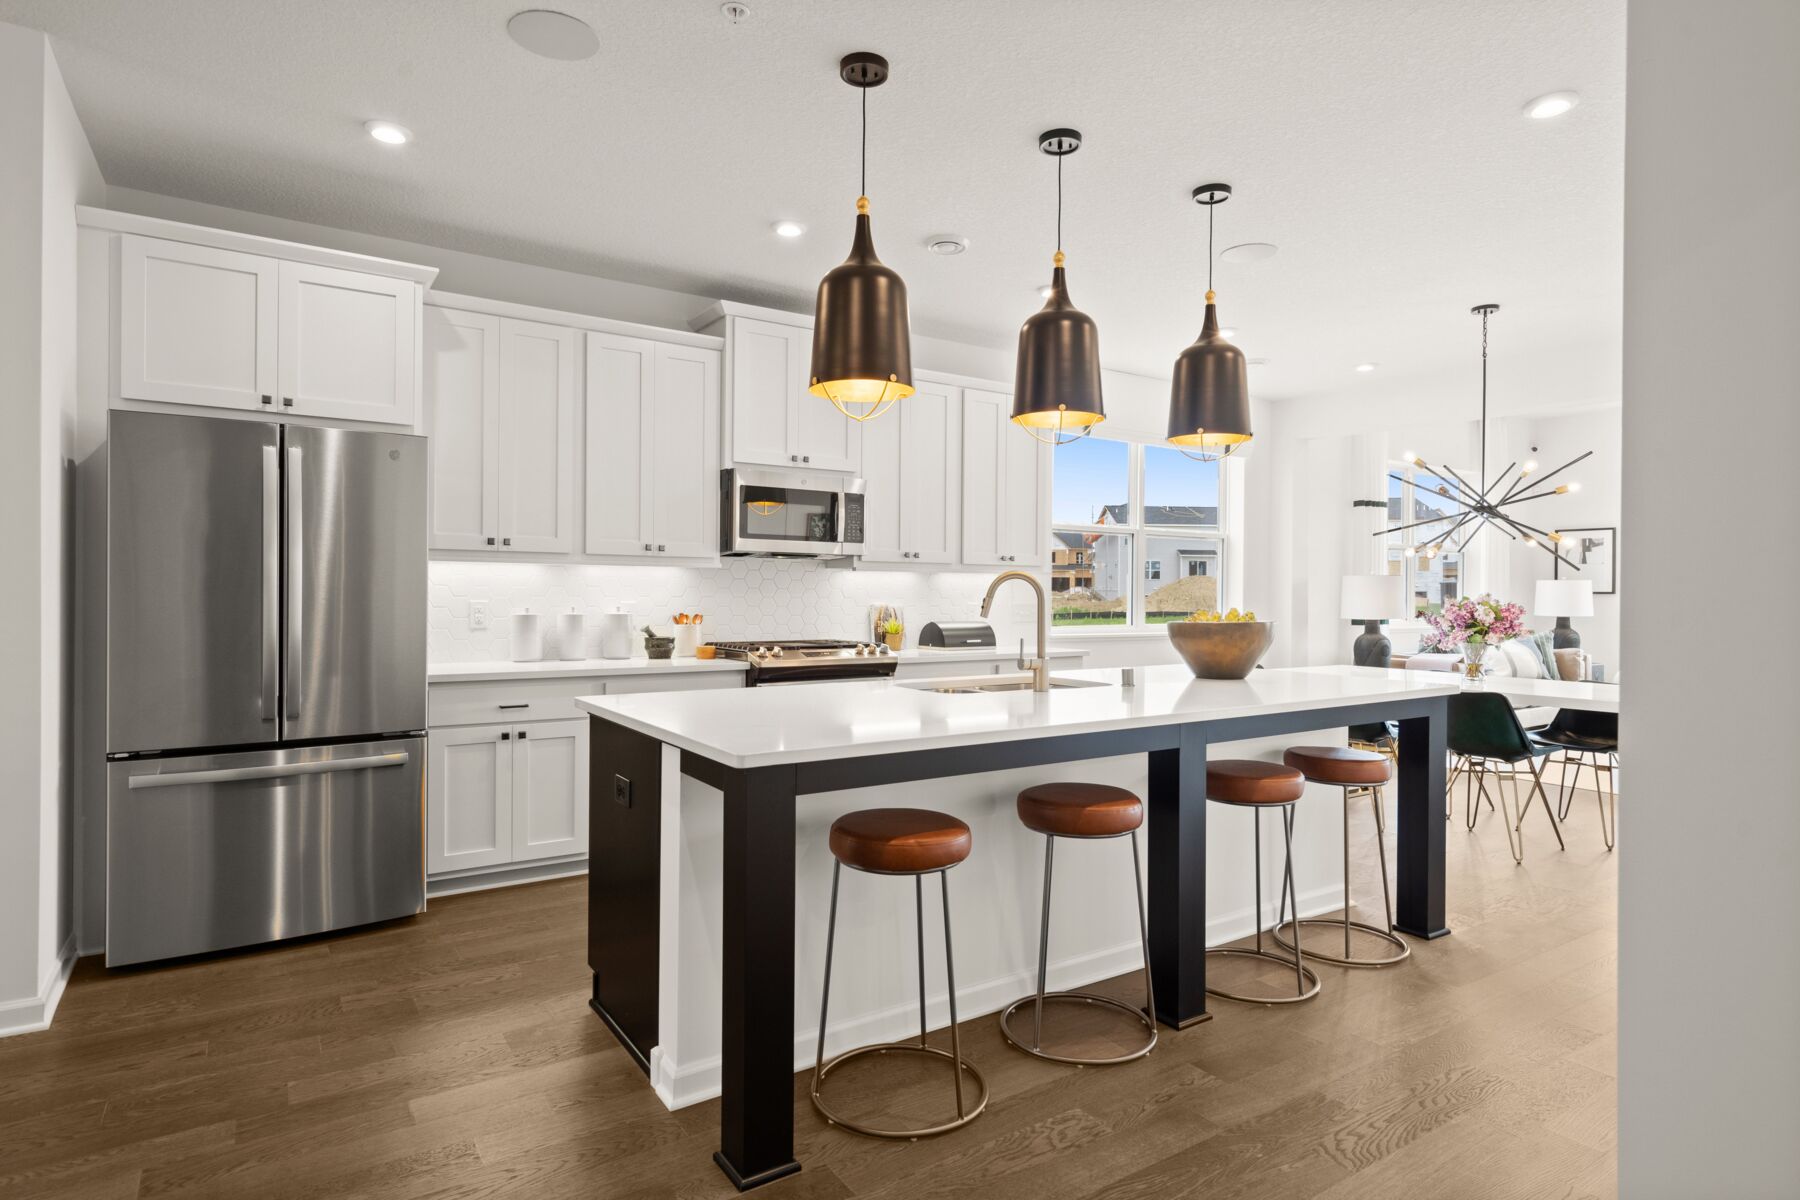 Bright kitchen with white cabinets and countertops and a long island with 4 stools